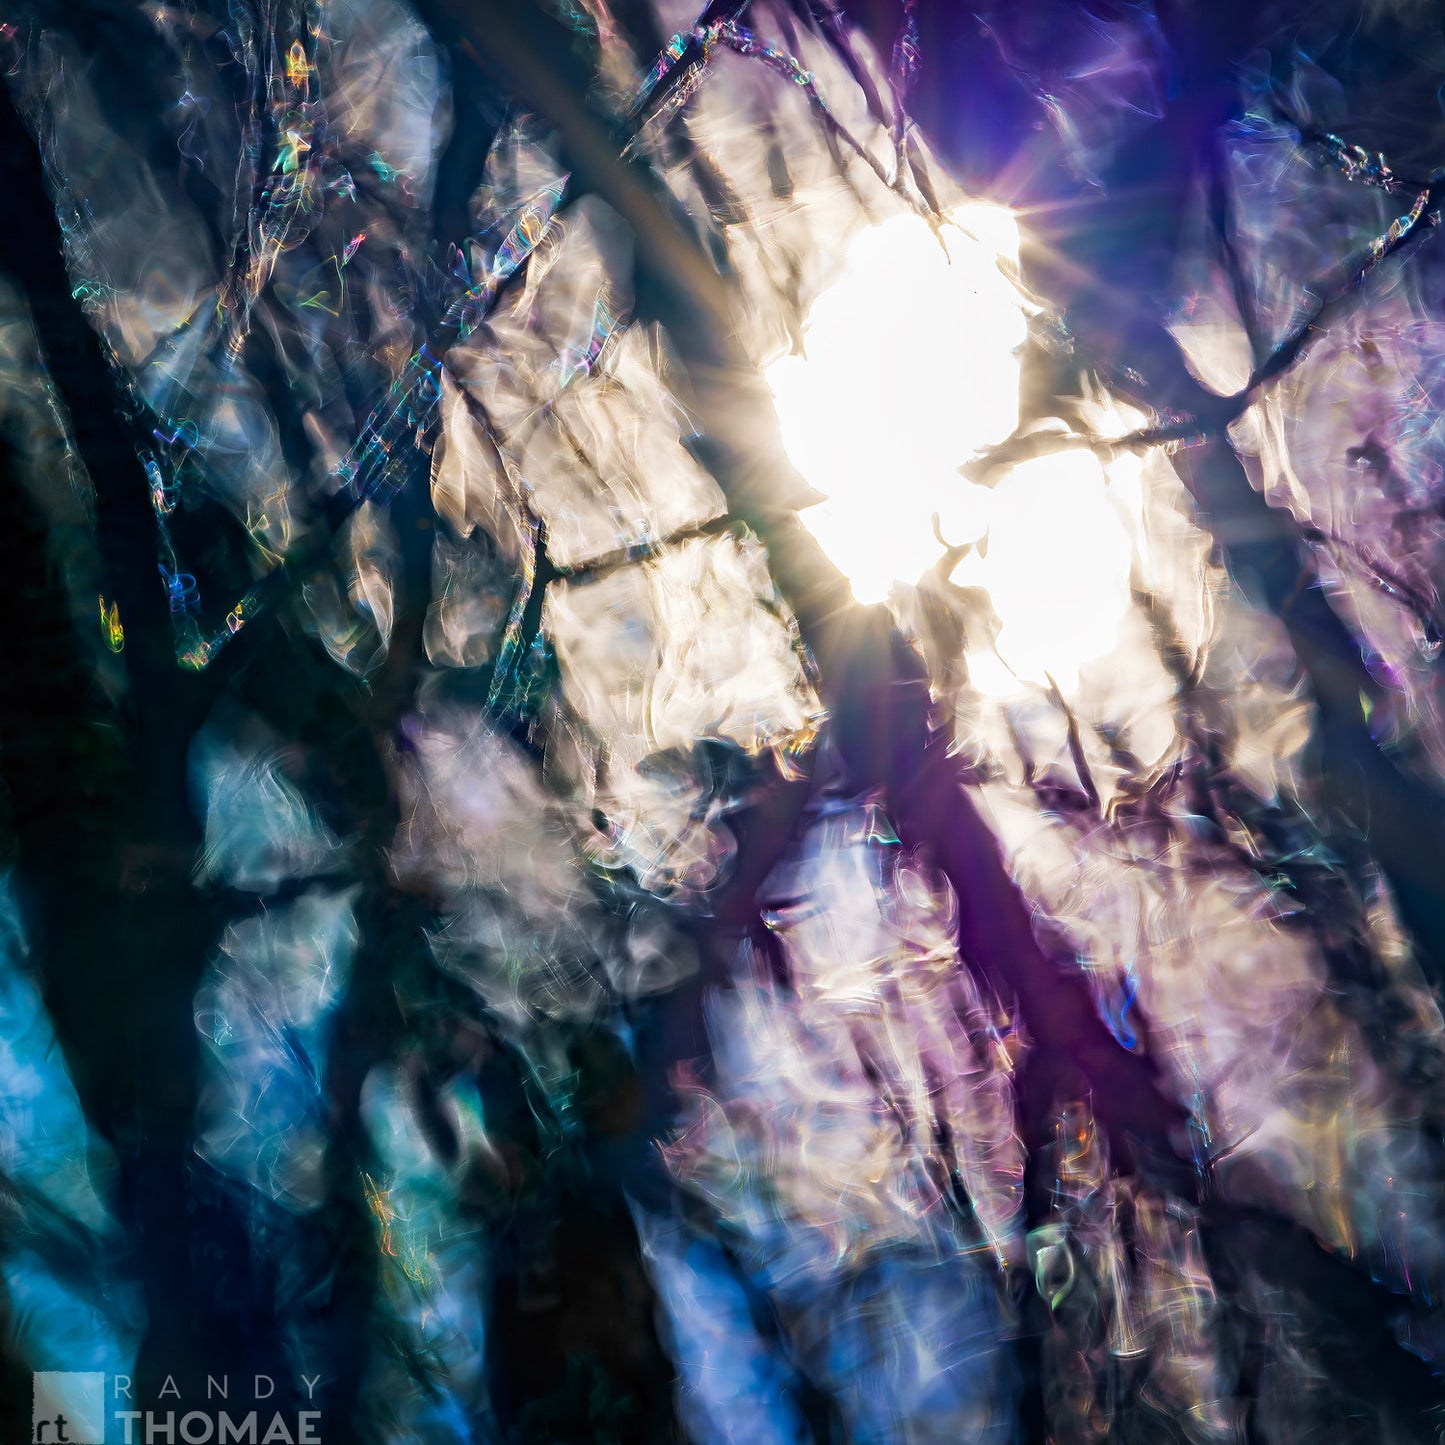 10x10 Metal prints: "Windows on the Fragile Nature of Hope"